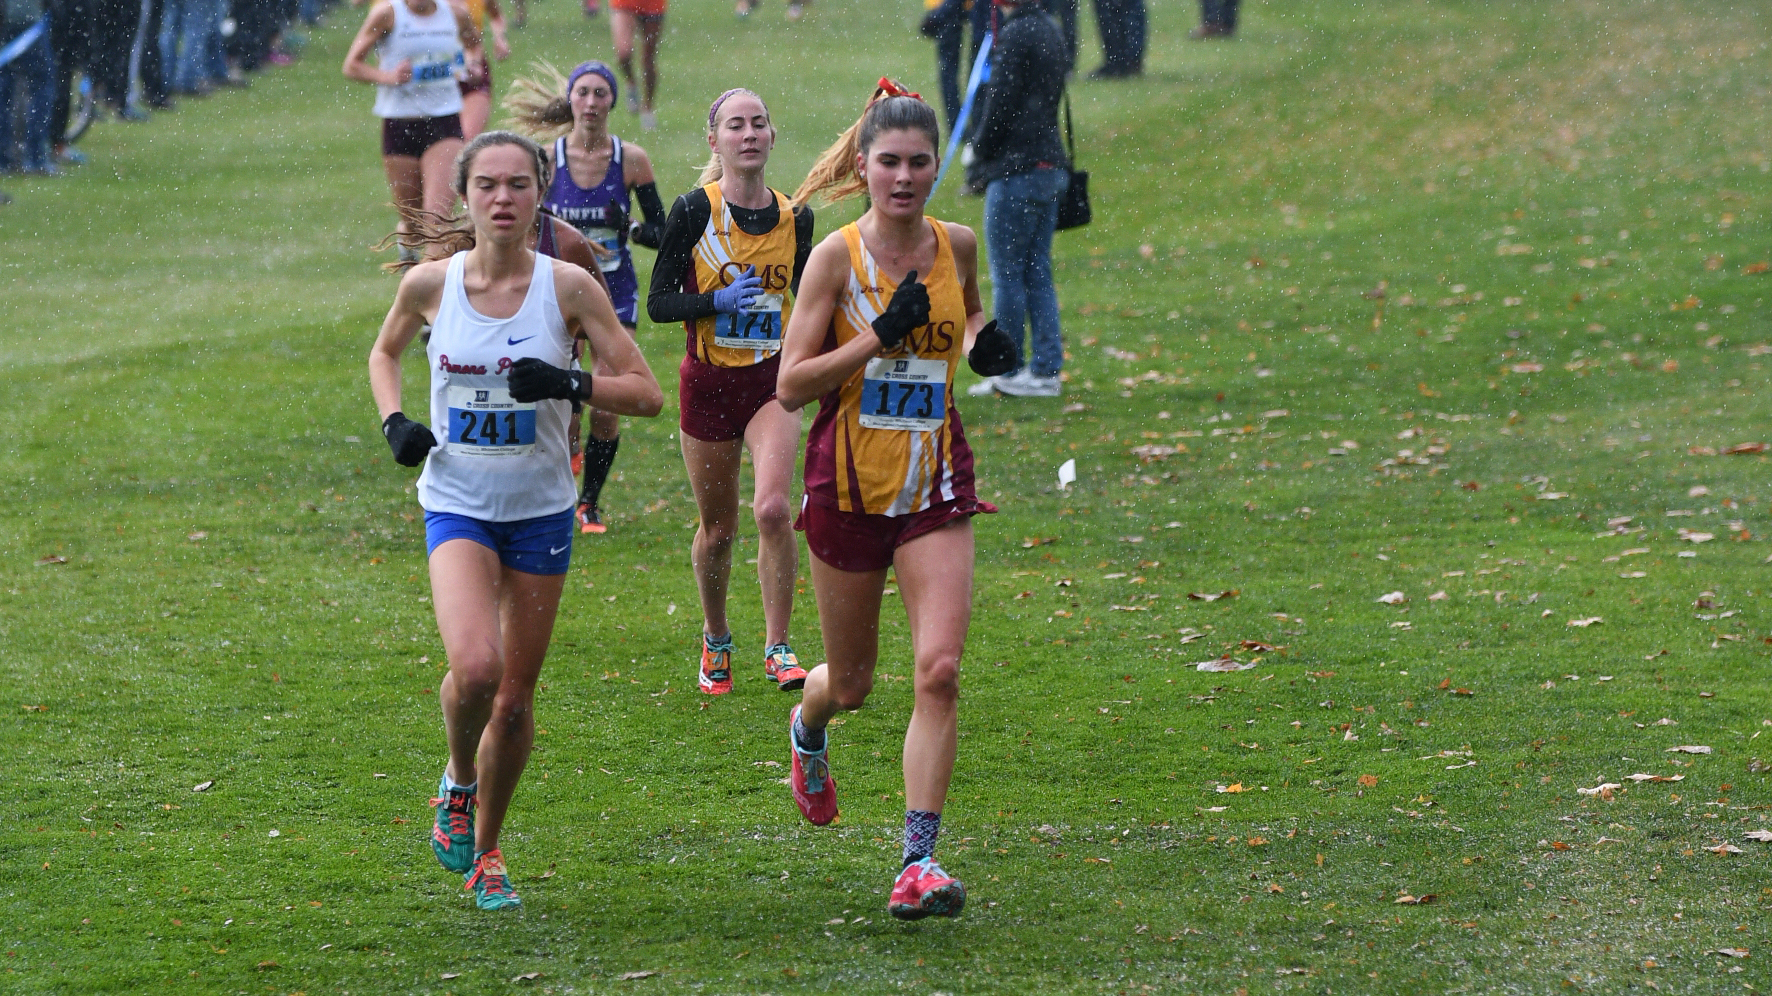 Regional Champs! CMS Women's Cross Country Wins West Title to Earn Automatic Bid to Nationals